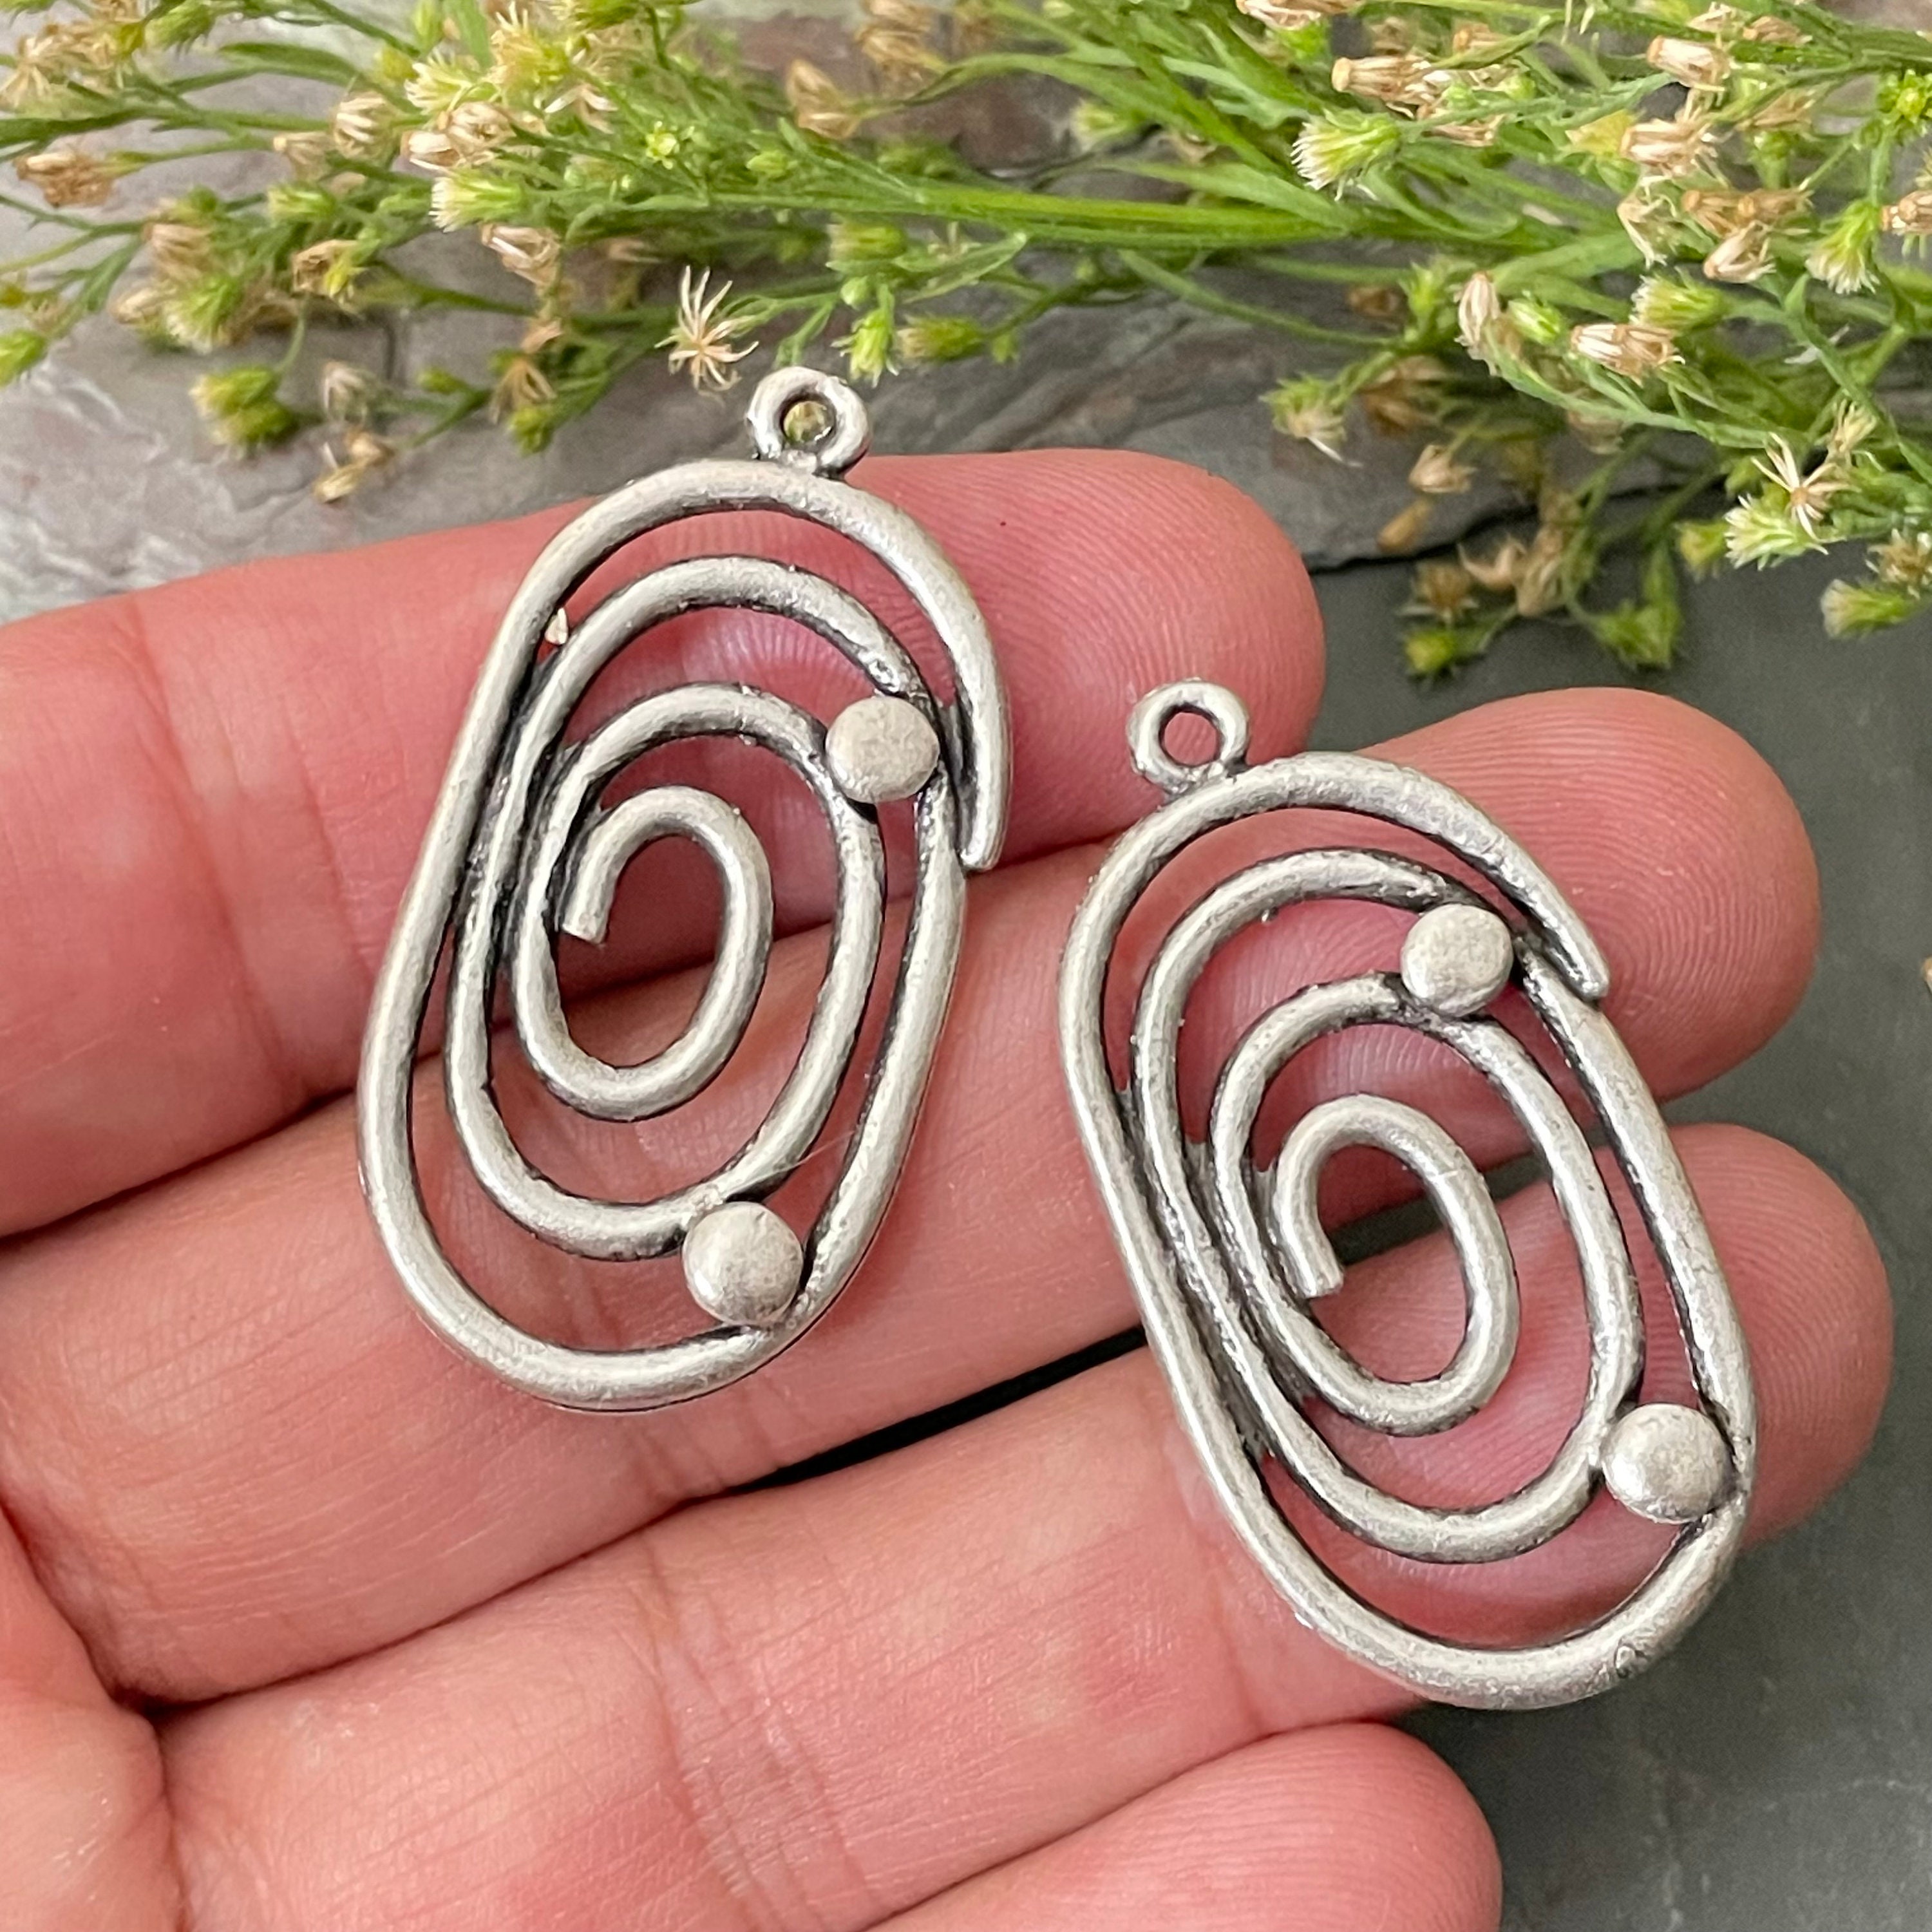 Wholesale earring findings for jewelry making parts.Antique Silver plated  earring parts. Best gift for her.8066